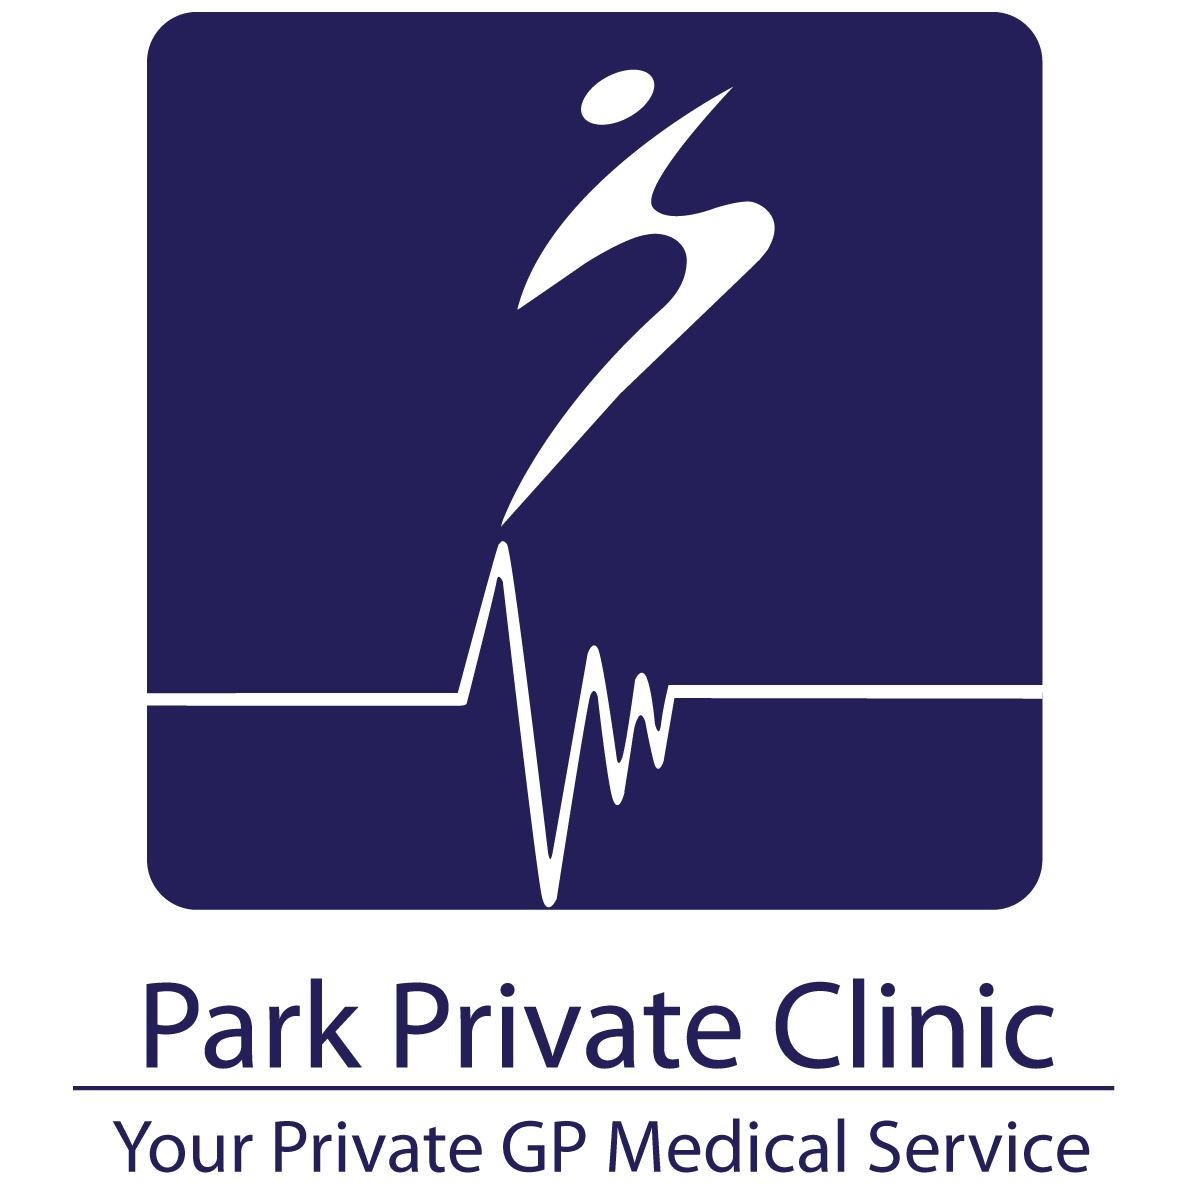 Park Private Clinic offer a range of services from health care, laser, skin and beauty, and weightloss treatments; Mon – Sat 9am – 7pm, based in in #Nottingham.